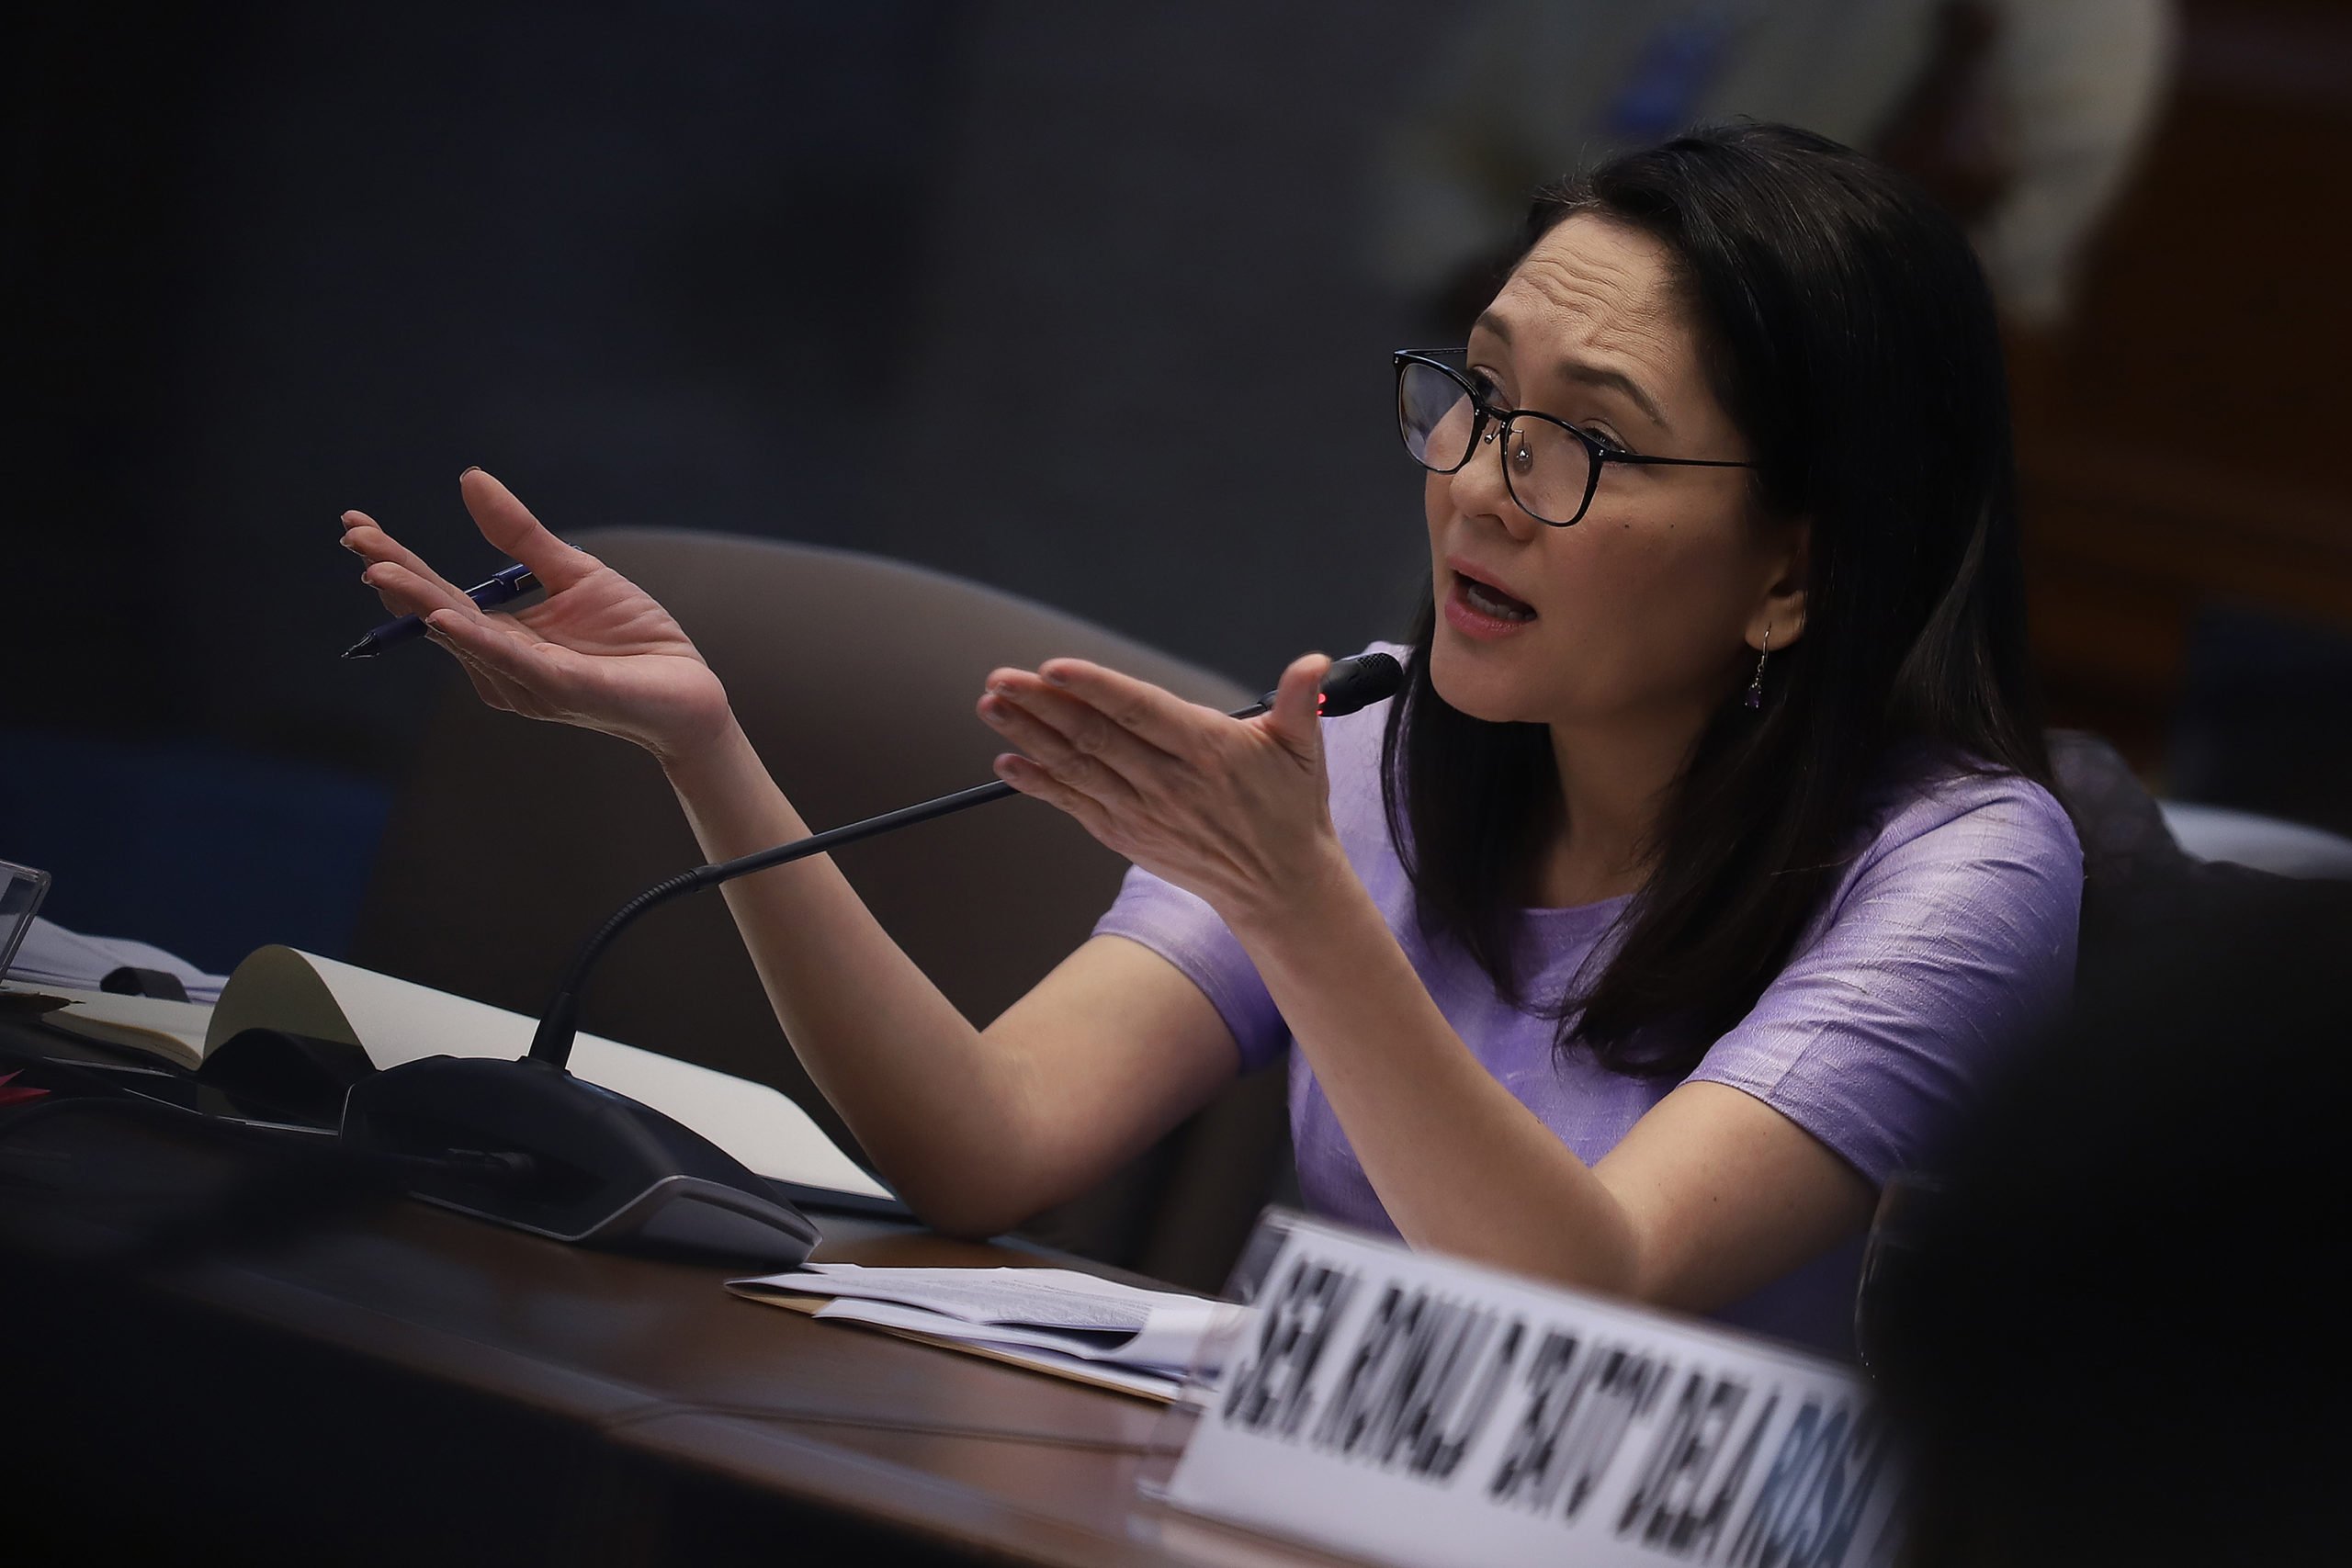 Senator Risa Hontiveros on Wednesday called for an intensified fight against illegal recruitment among aspiring Overseas Filipino Workers, saying perpetrators must be held accountable. 